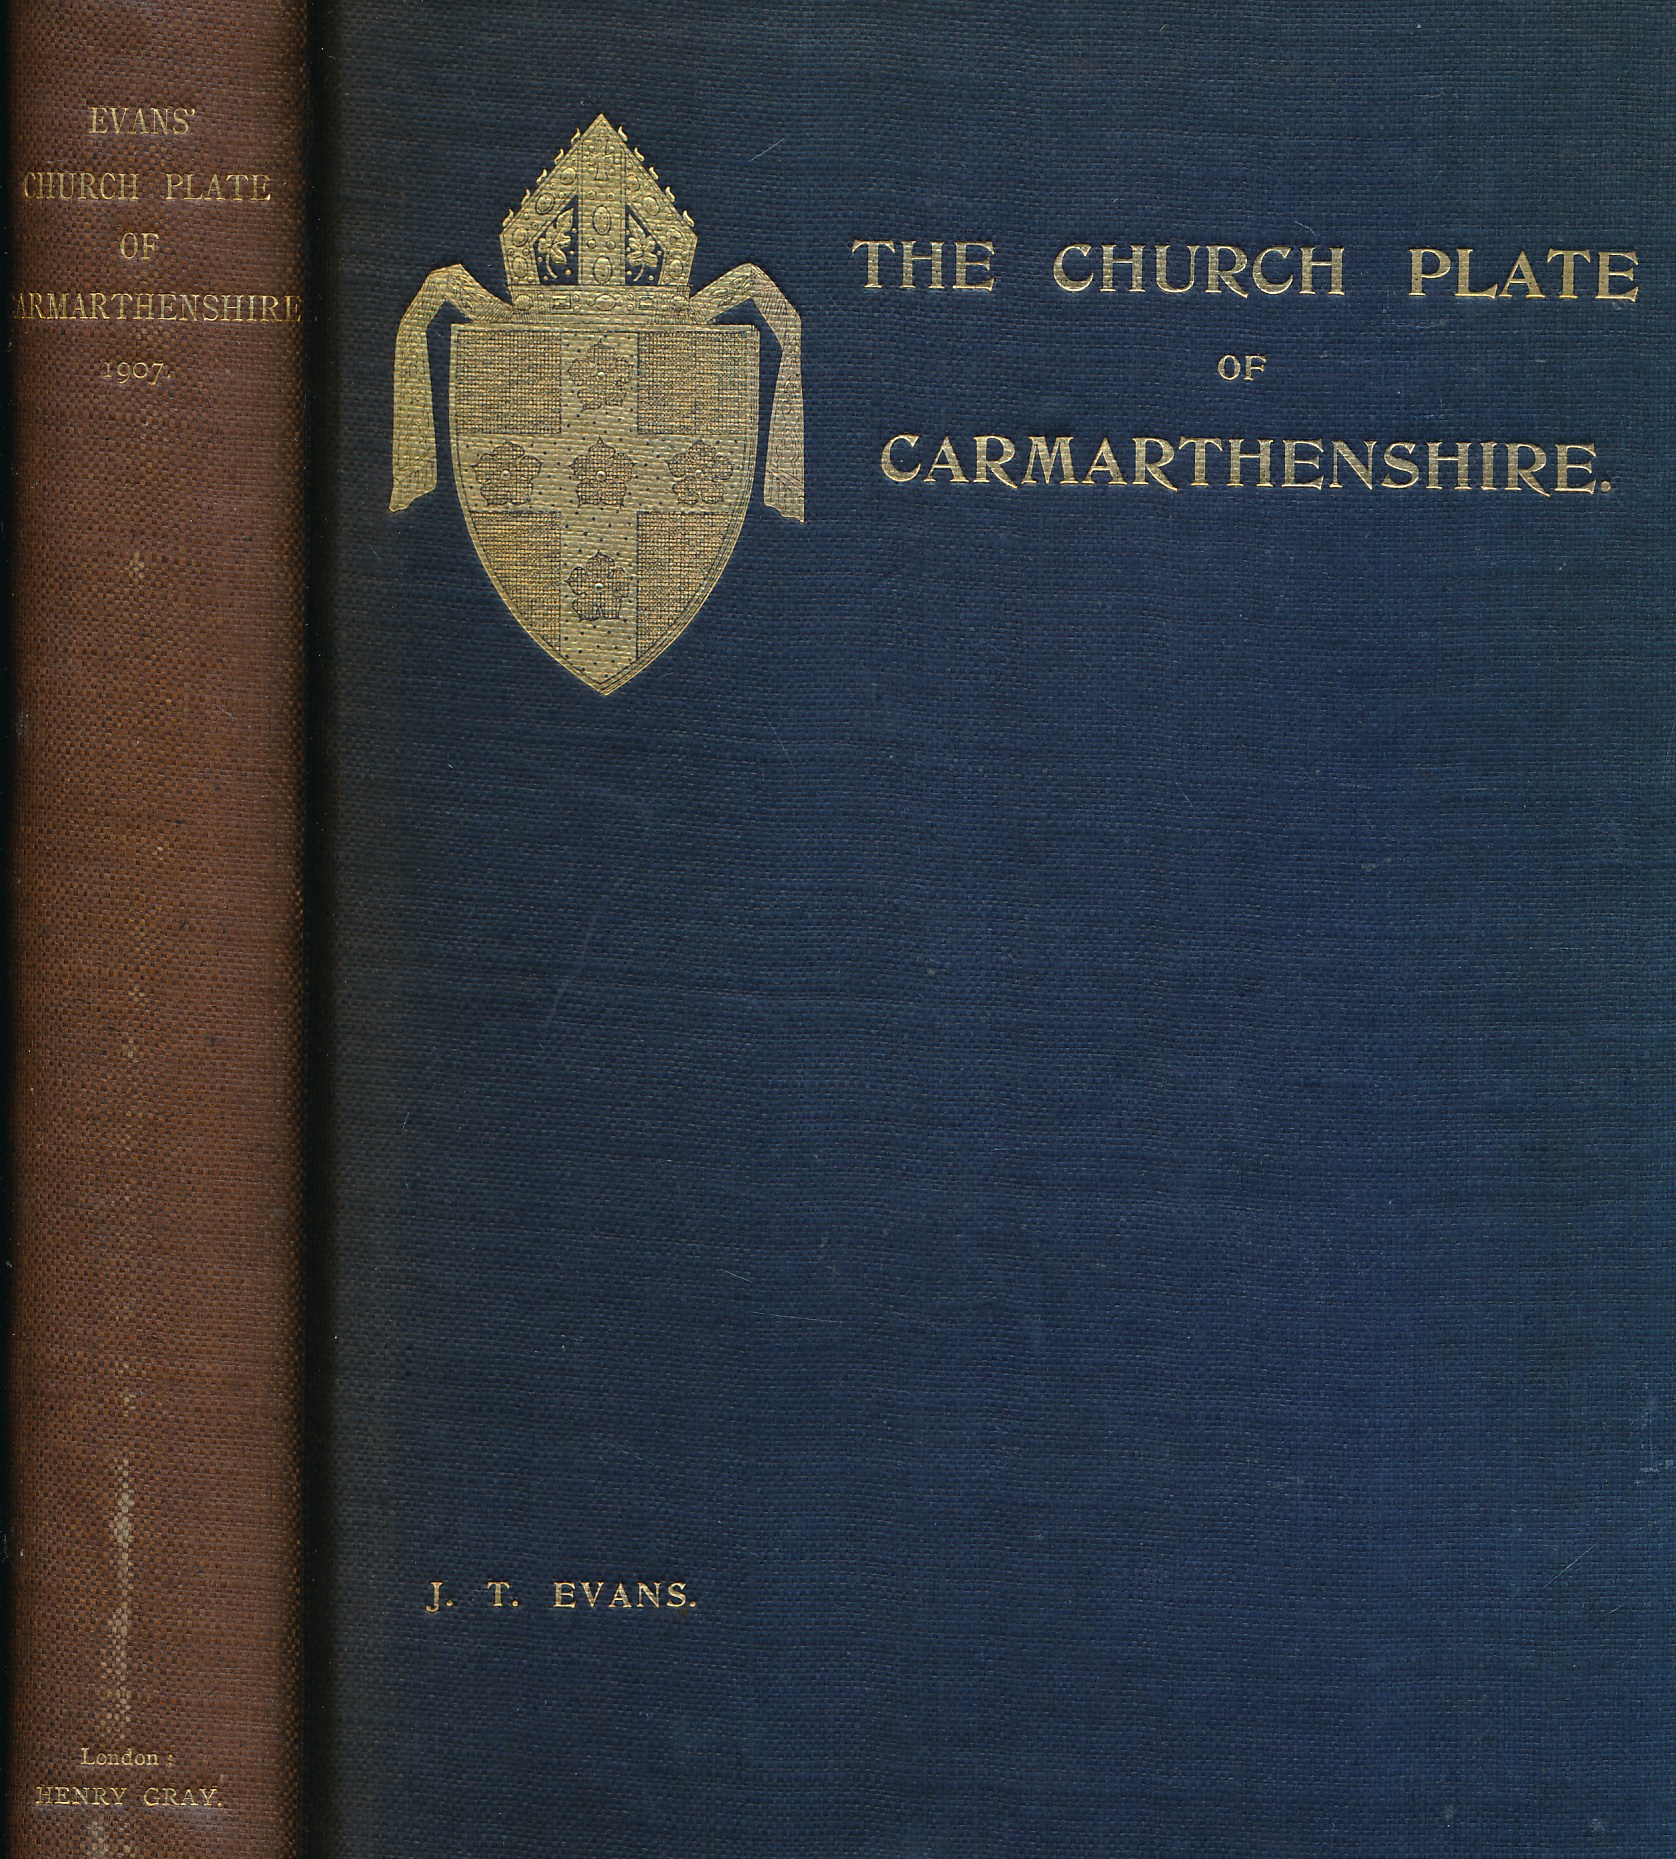 The Church Plate of Carmarthenshire